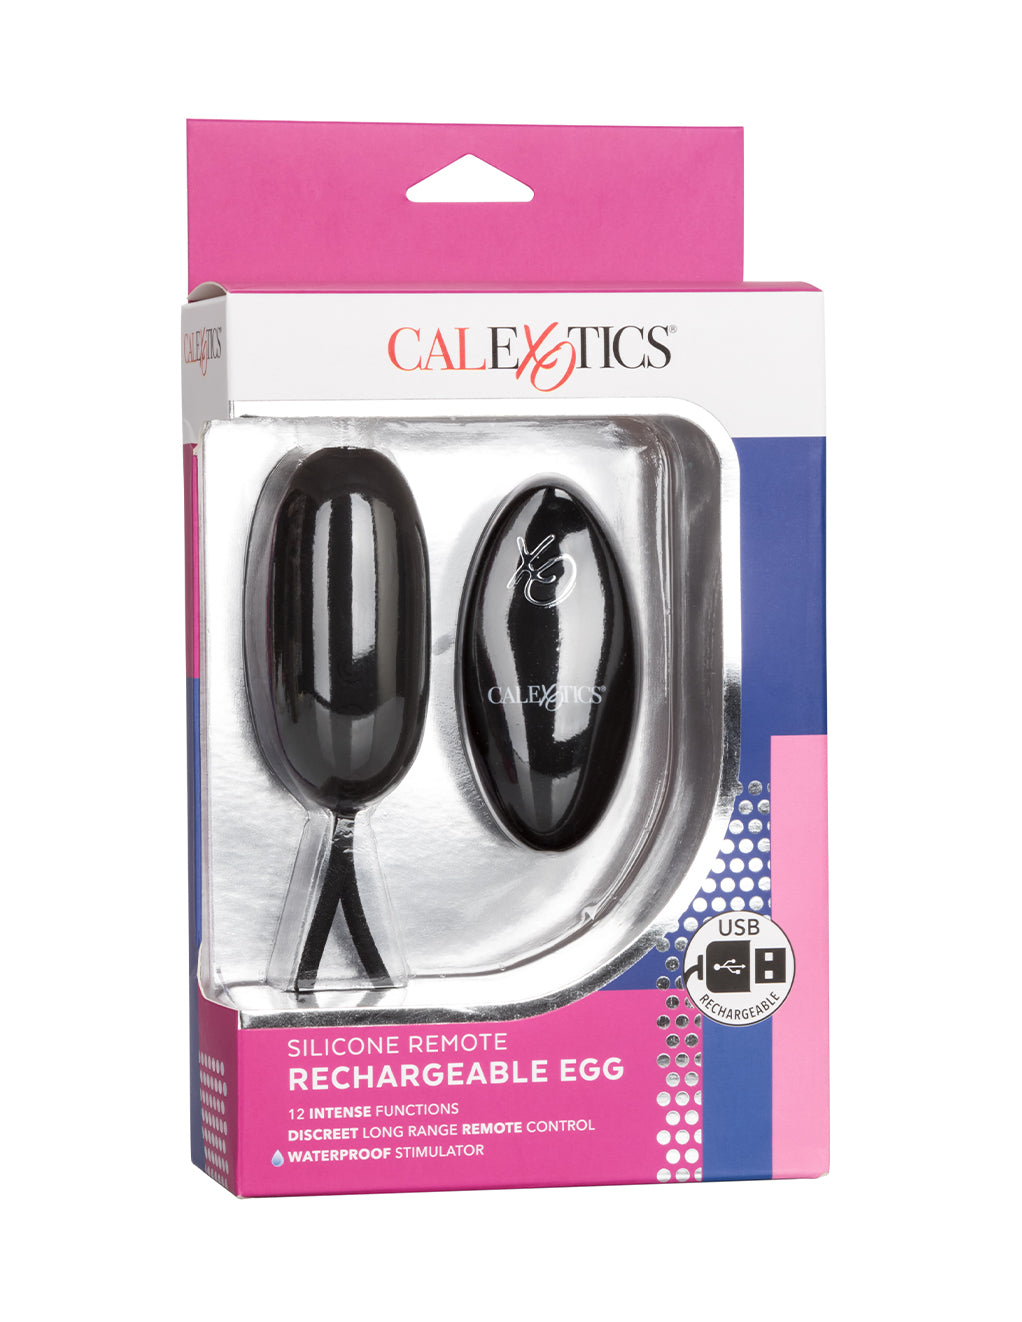 CalEx Remote Rechargeable Egg- Package